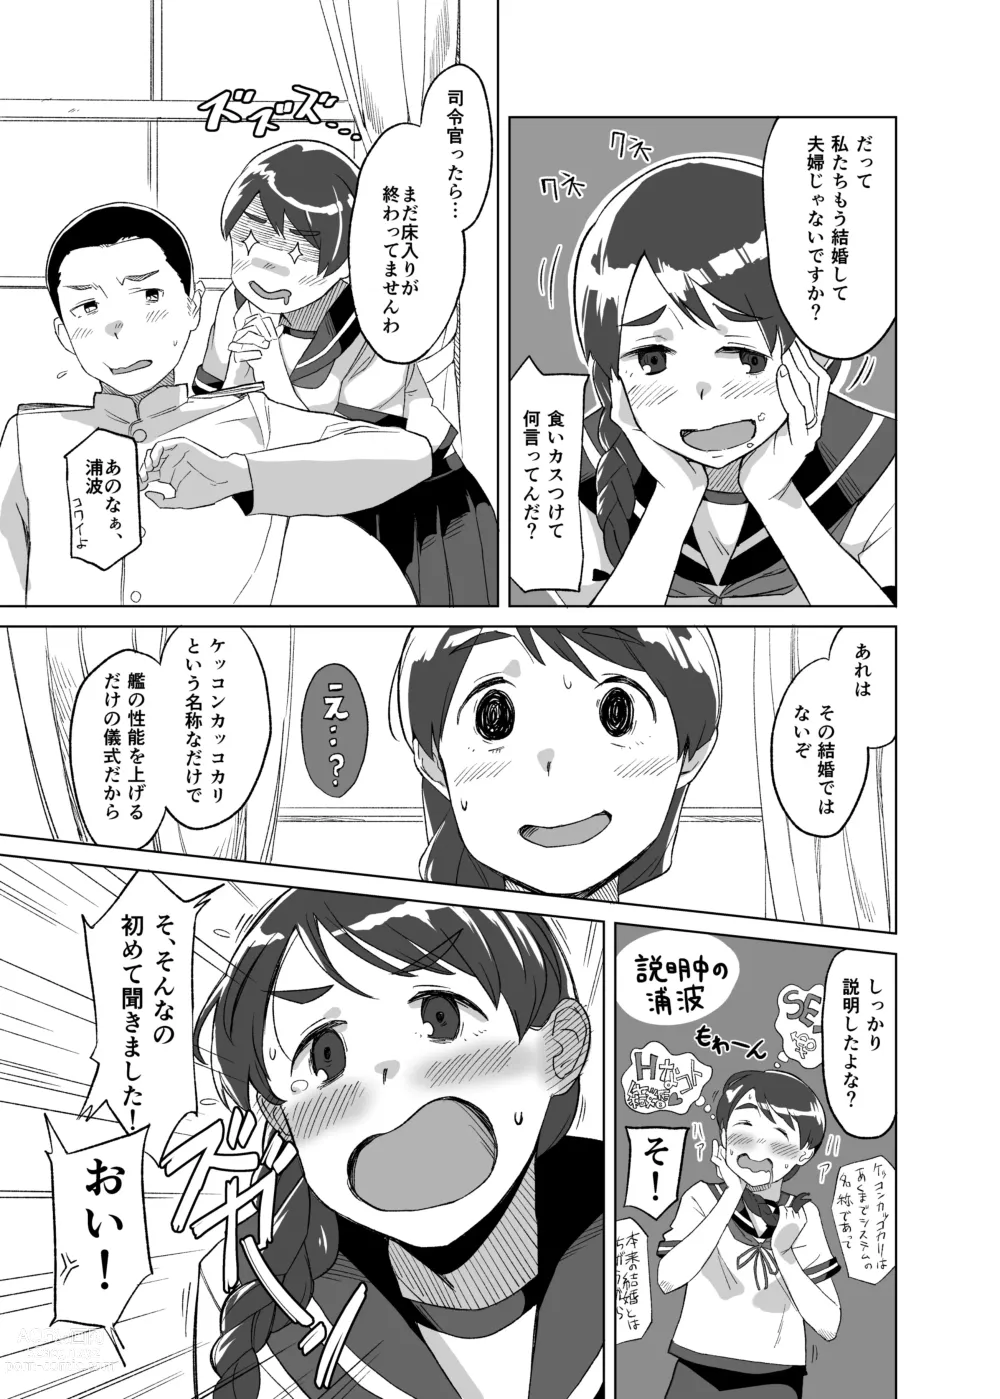 Page 4 of doujinshi Ding Dong